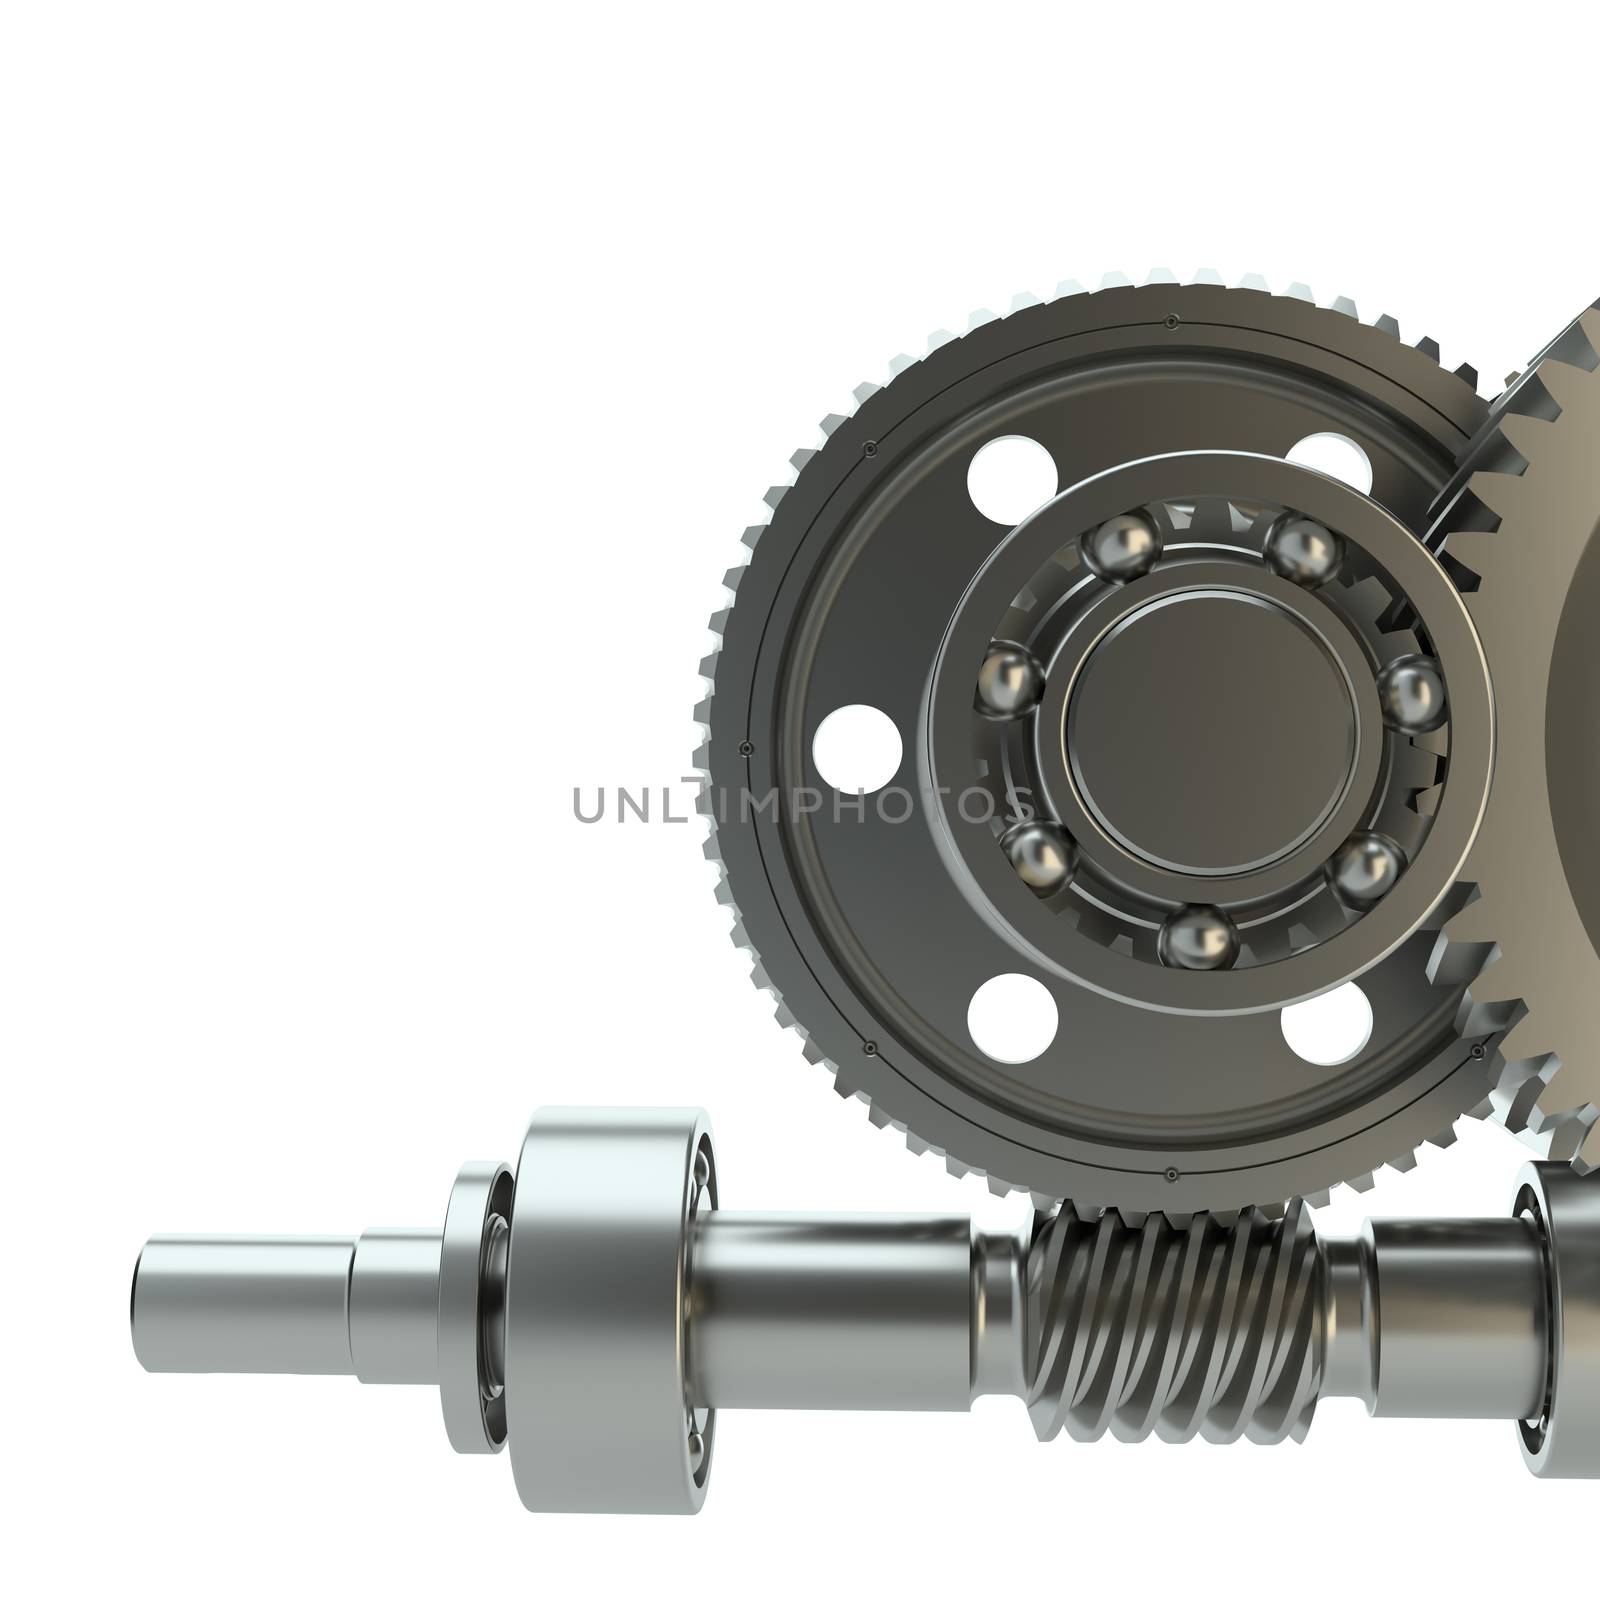 Gear metal wheels, isolated on white background. 3d illustration